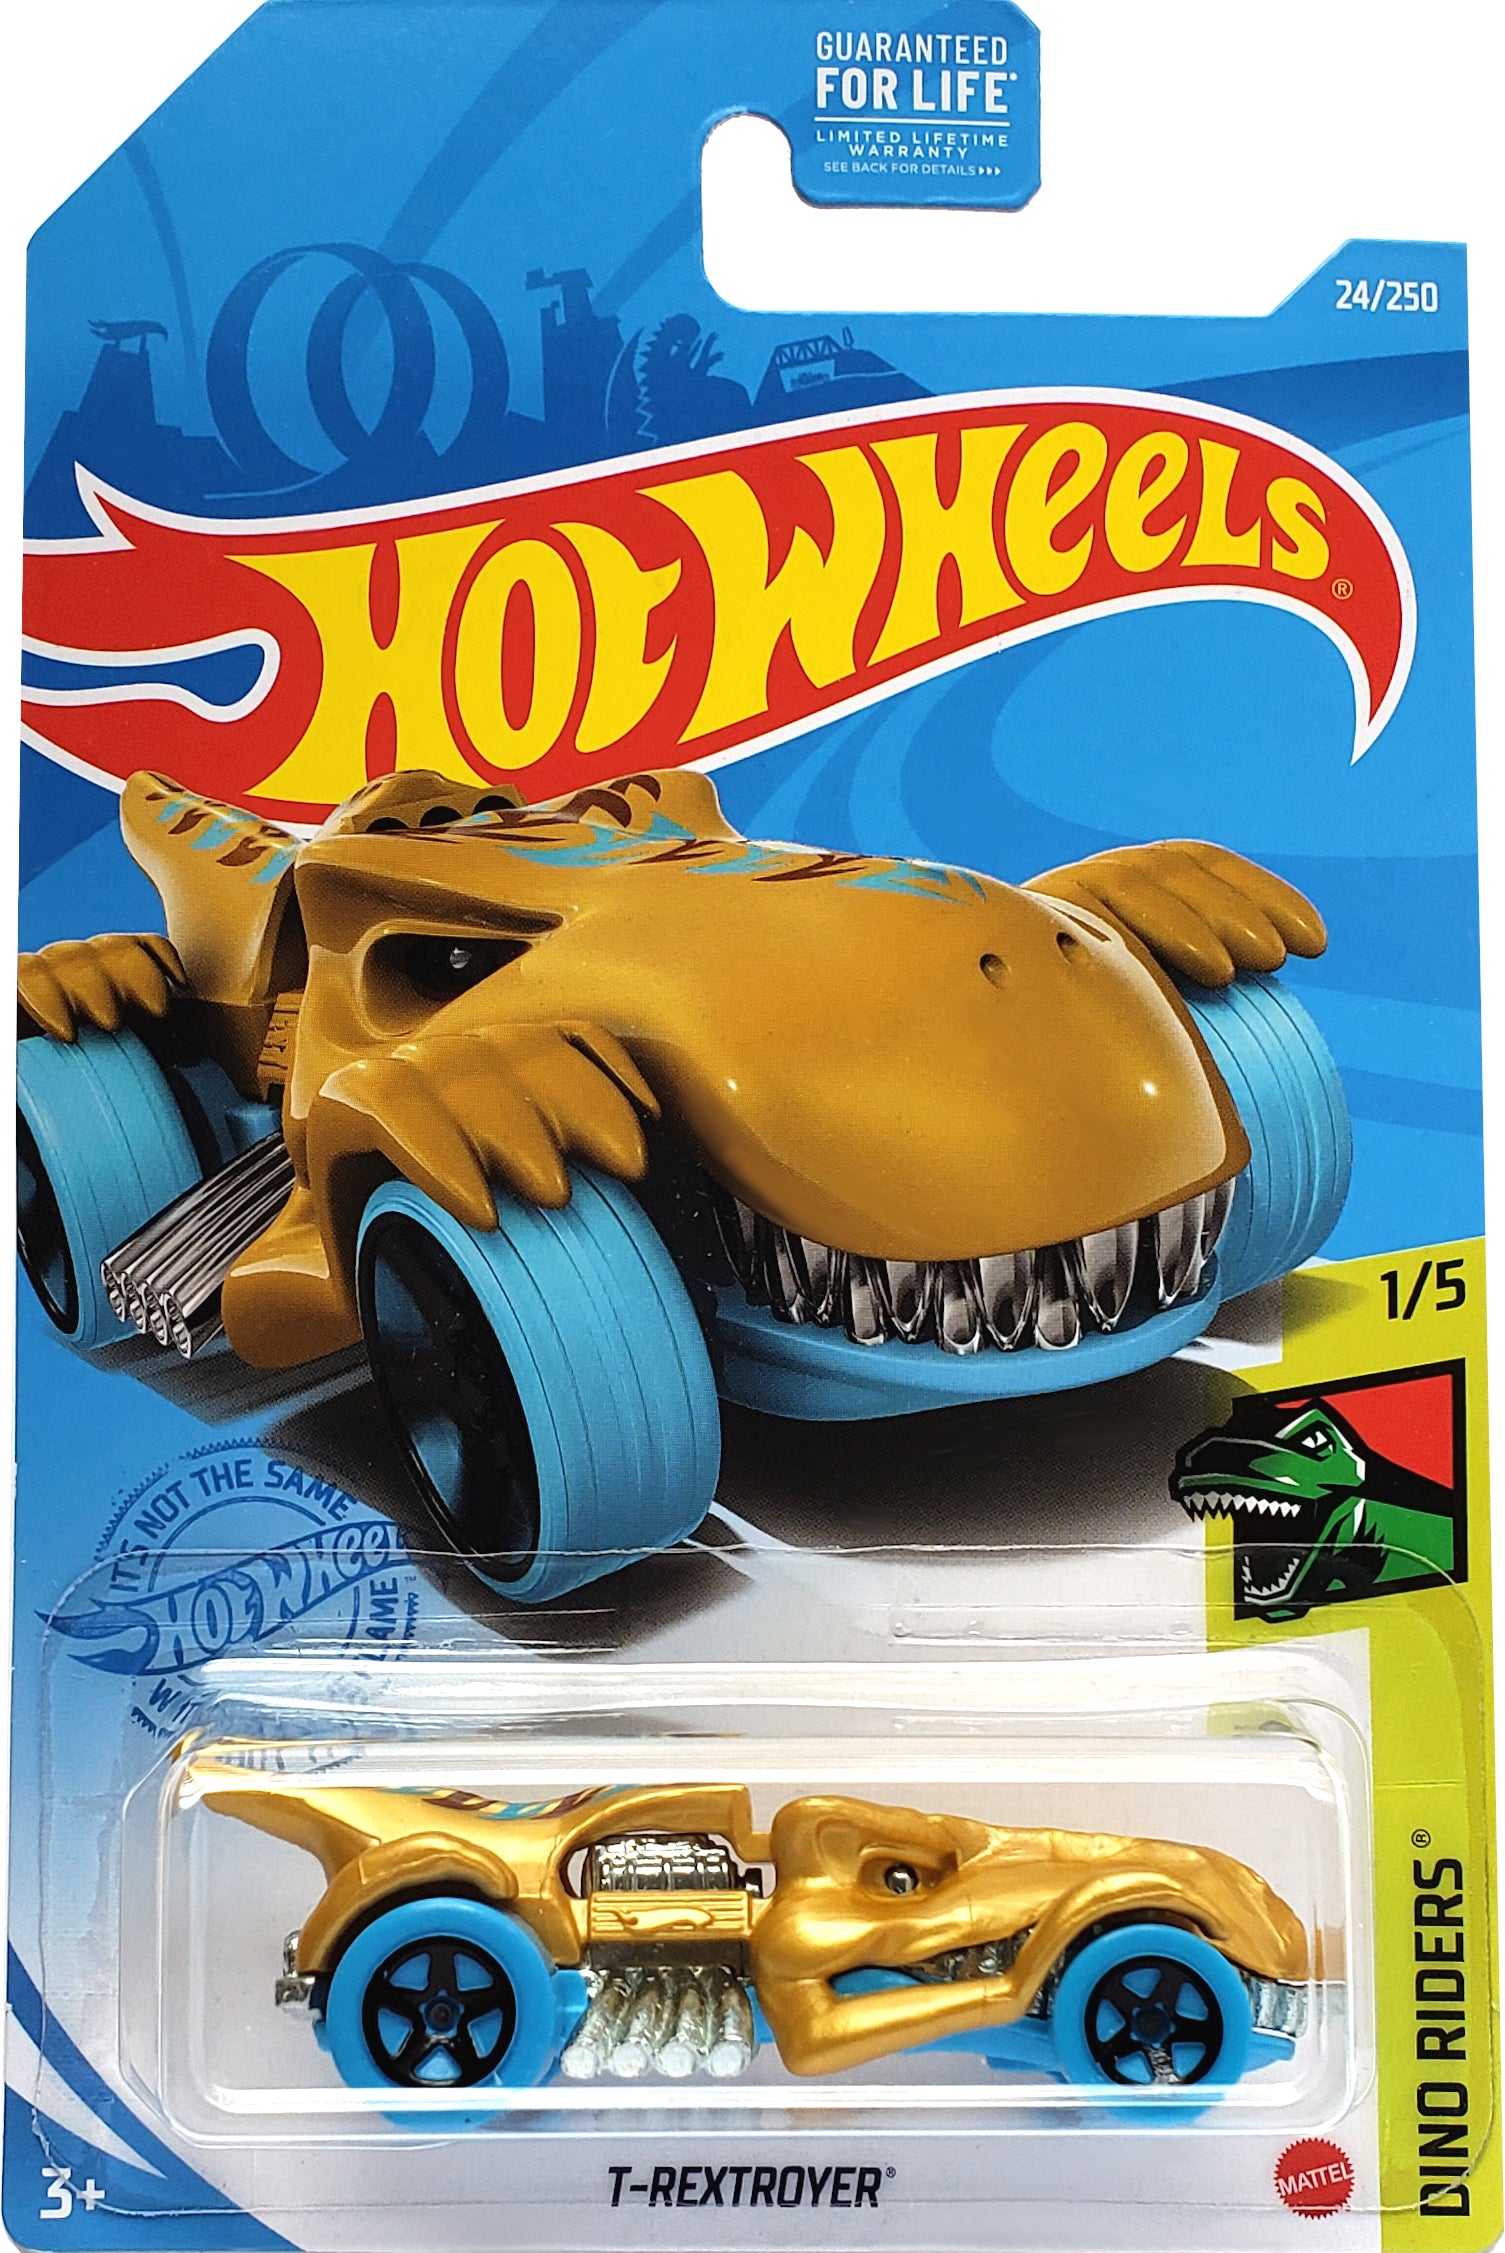 2021 Hot Wheels Mainline #024 - T-Rextroyer (Dinosaur Gold) GRY60